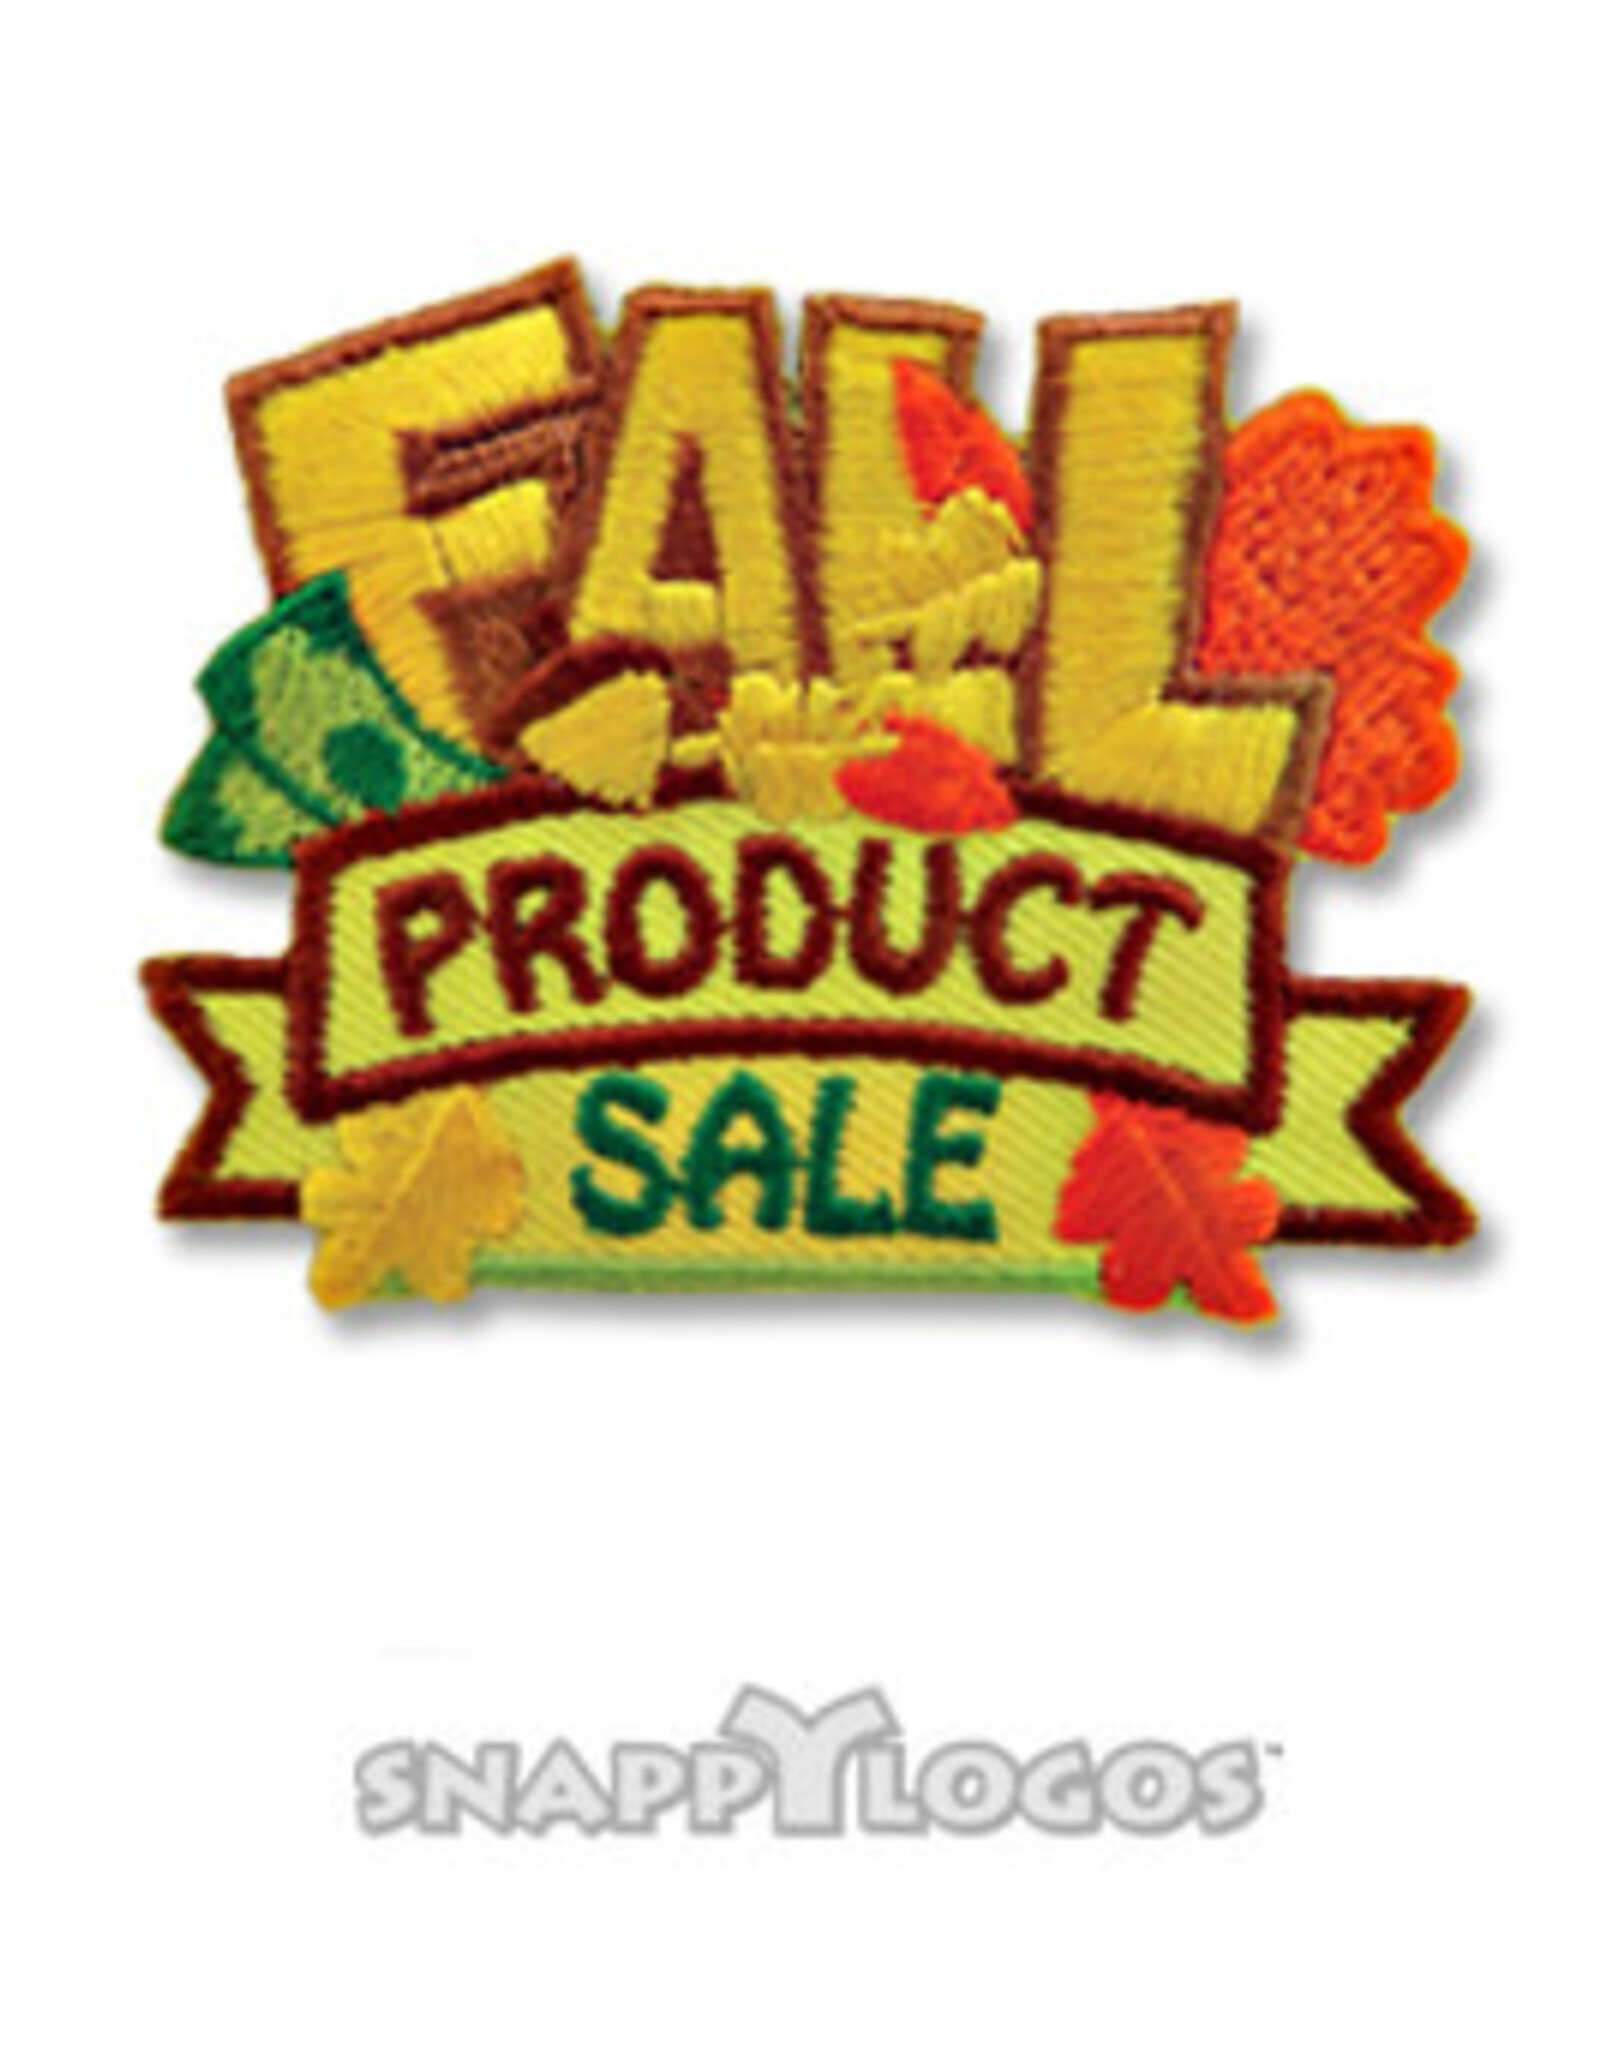 snappylogos Fall Product Sale Fun Patch (7052)